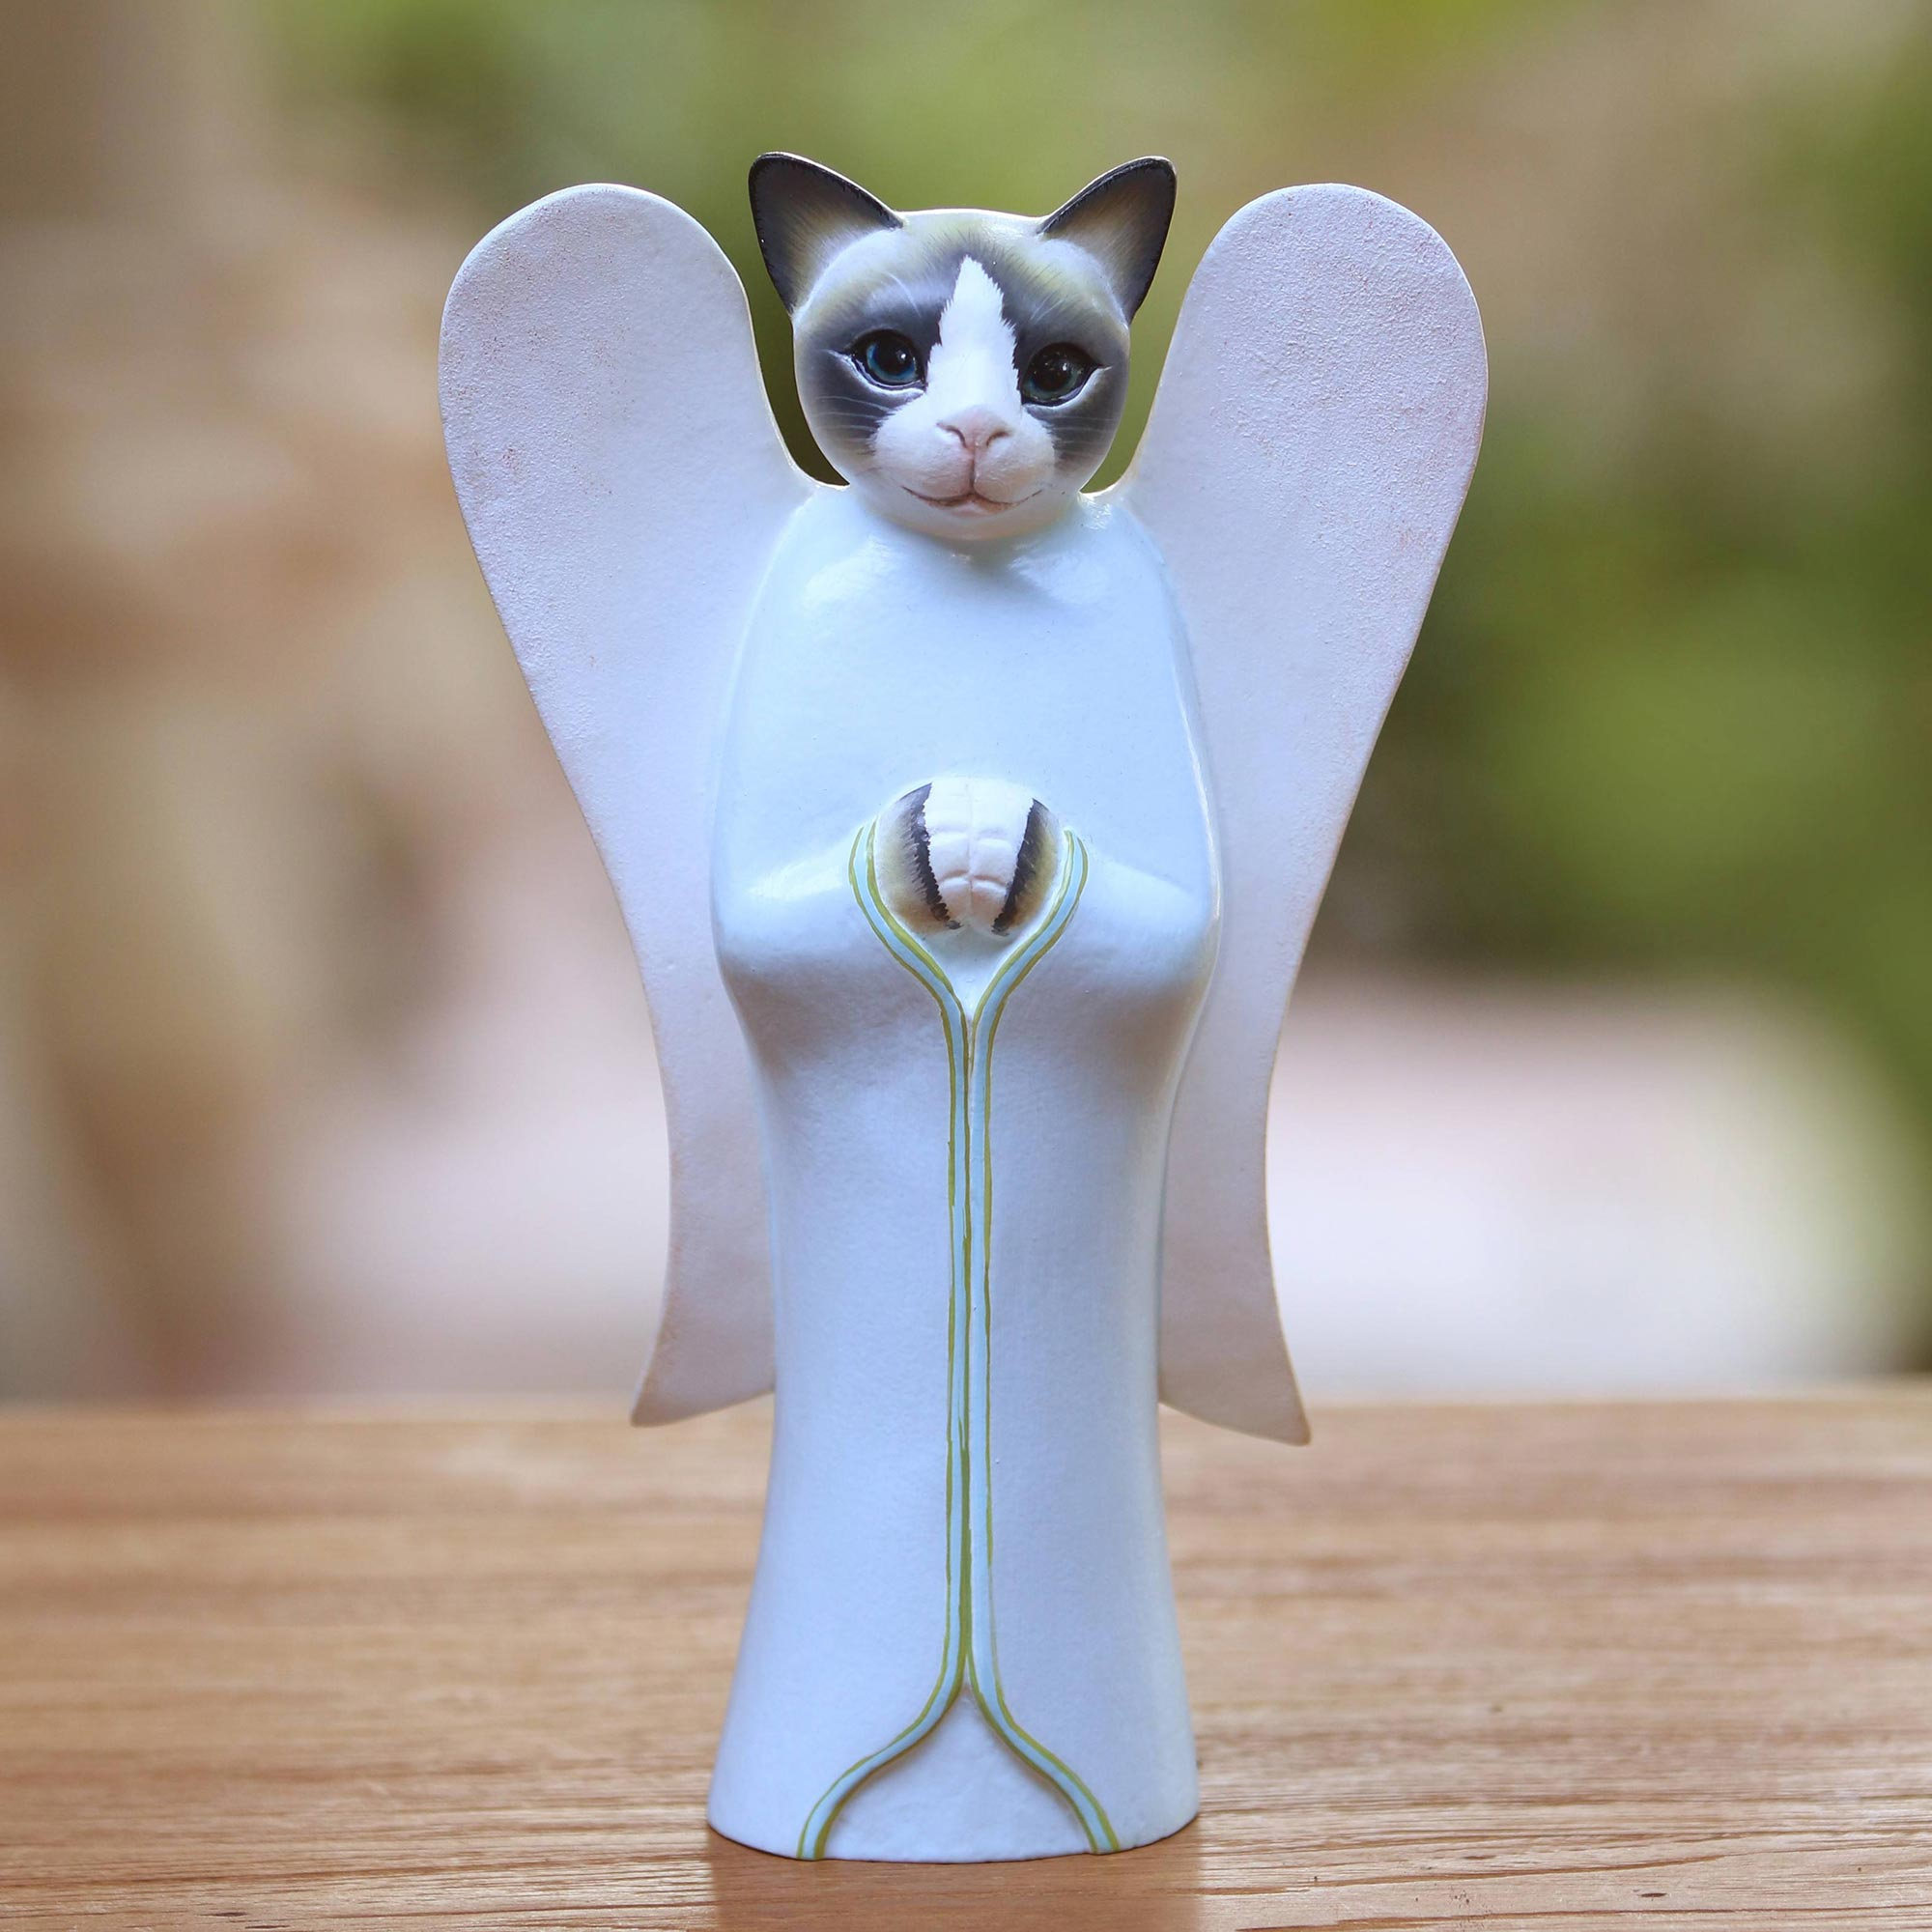 cat with angel wings